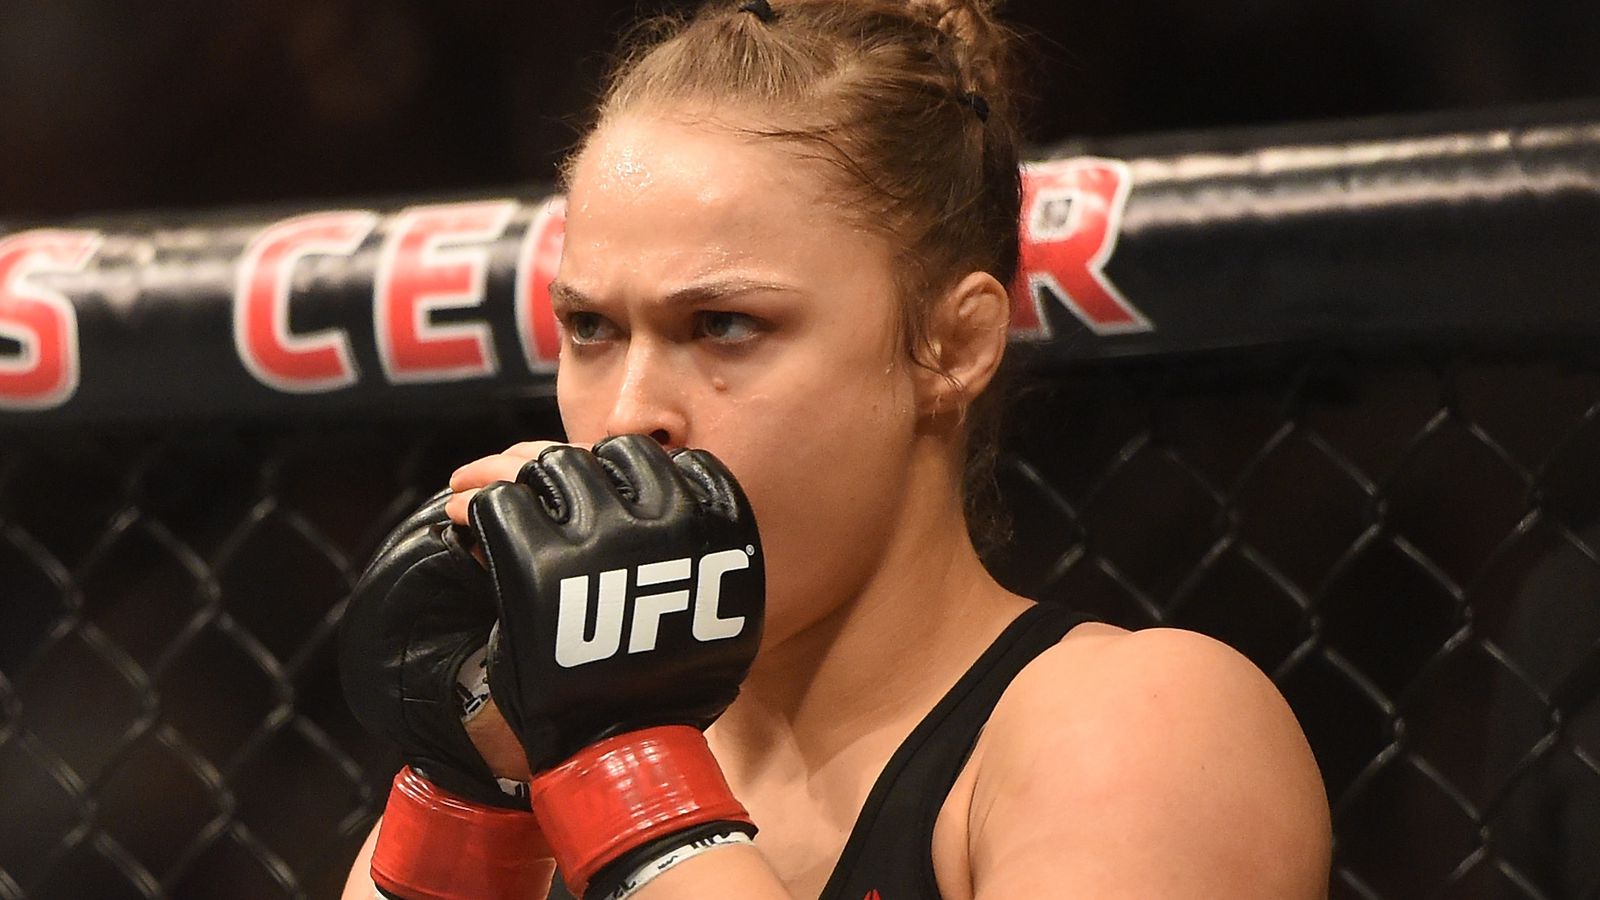 Latest Ufc 190 Fight Card And Rumors For Rousey Vs Correia Ppv On